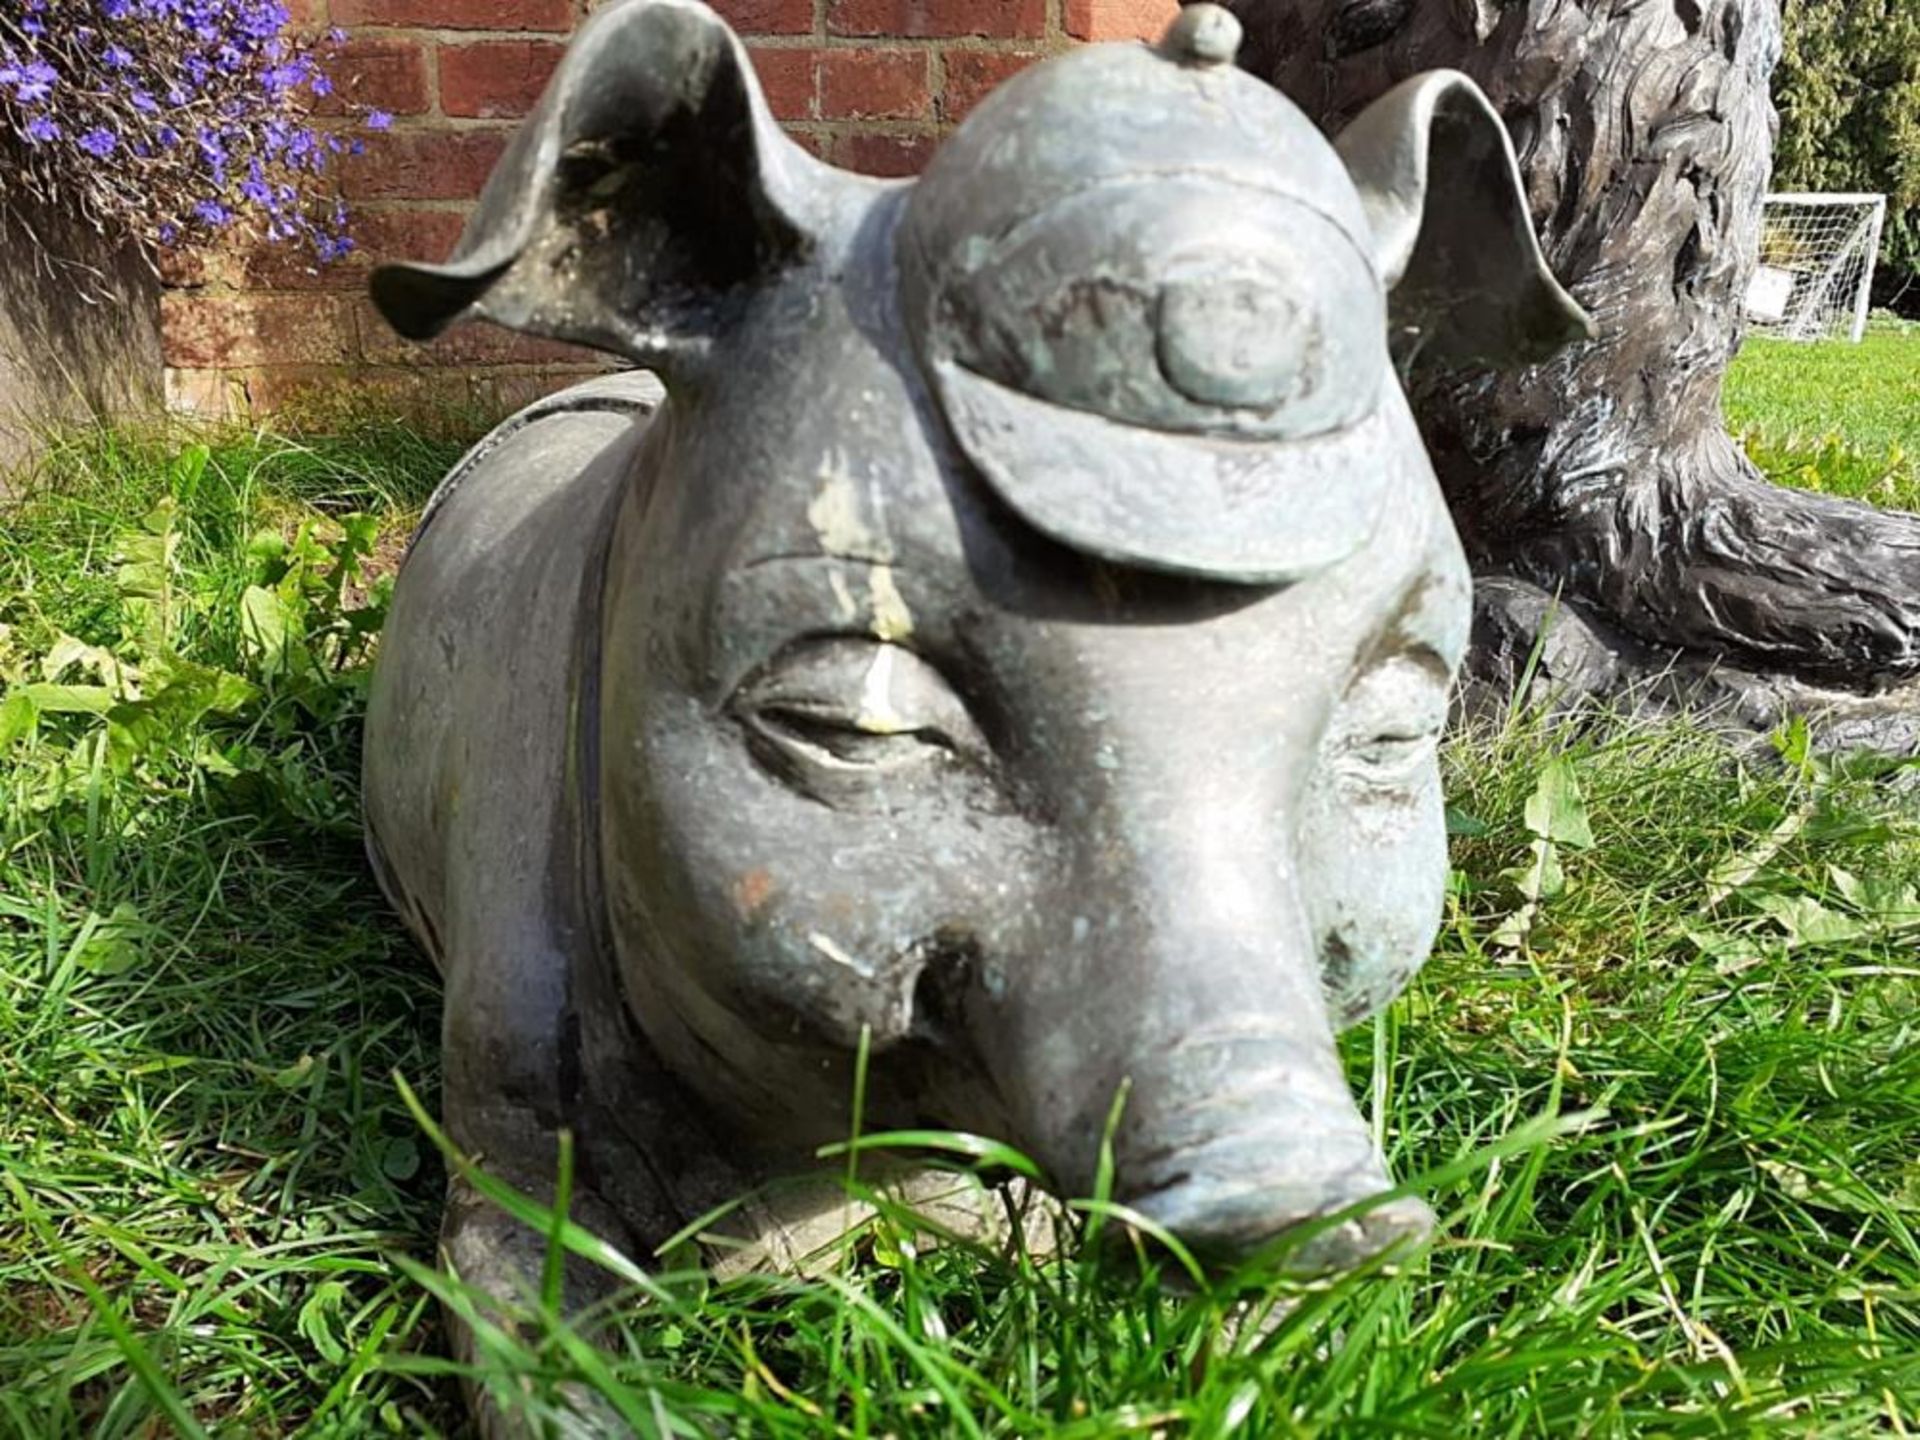 1 x Lazy Pig Metal Garden Statue - Dimensions: L 80cm x 30 x height 30cm - Ref: JB101 - Pre-Owned - - Image 3 of 8